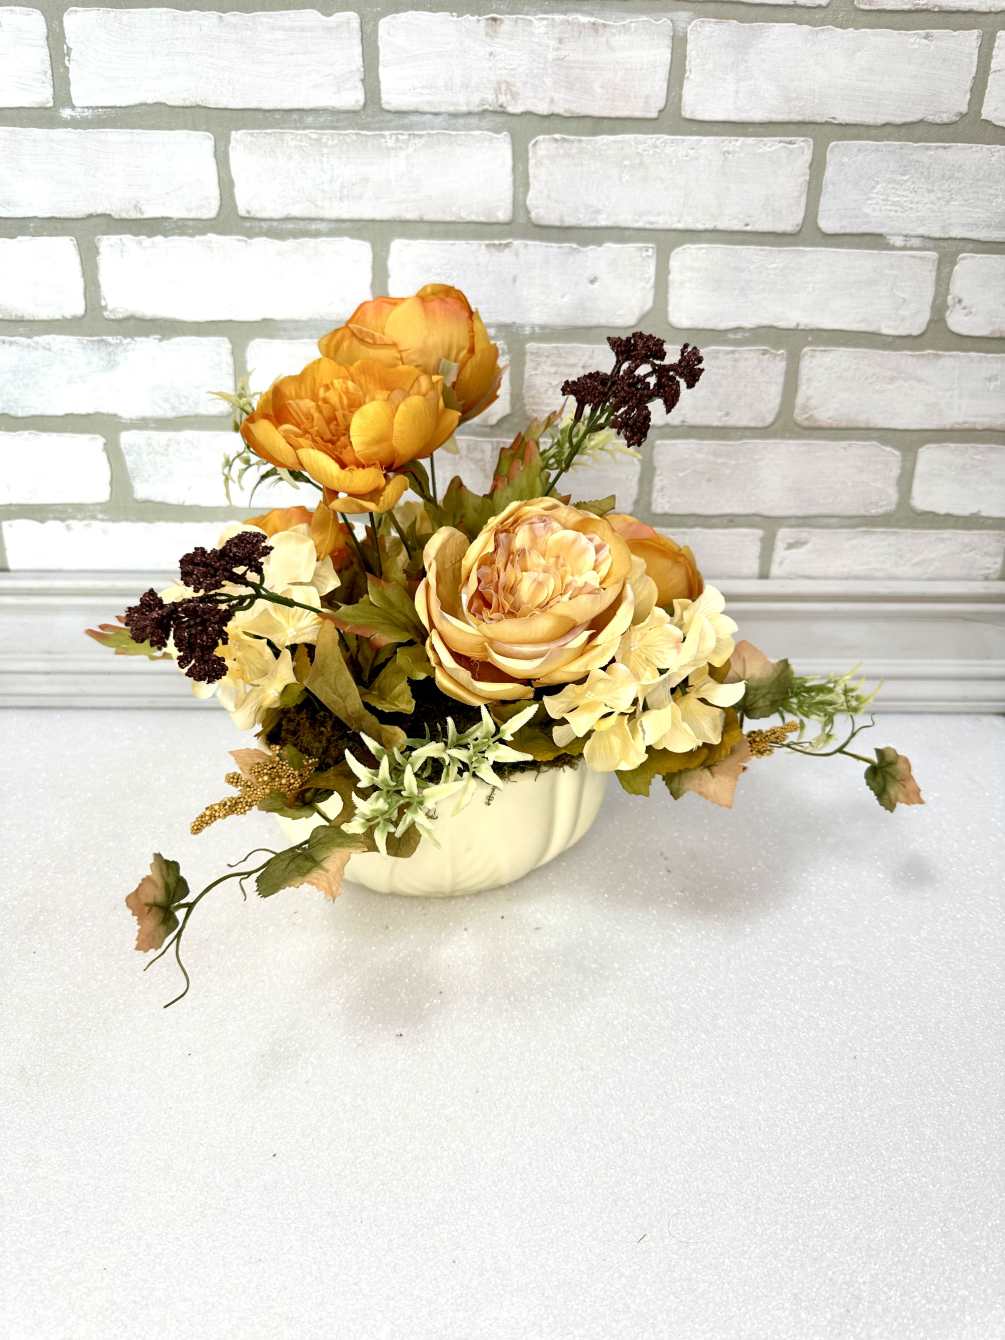 An artificial arrangement with orange peonies, other mixed flowers, and greens in